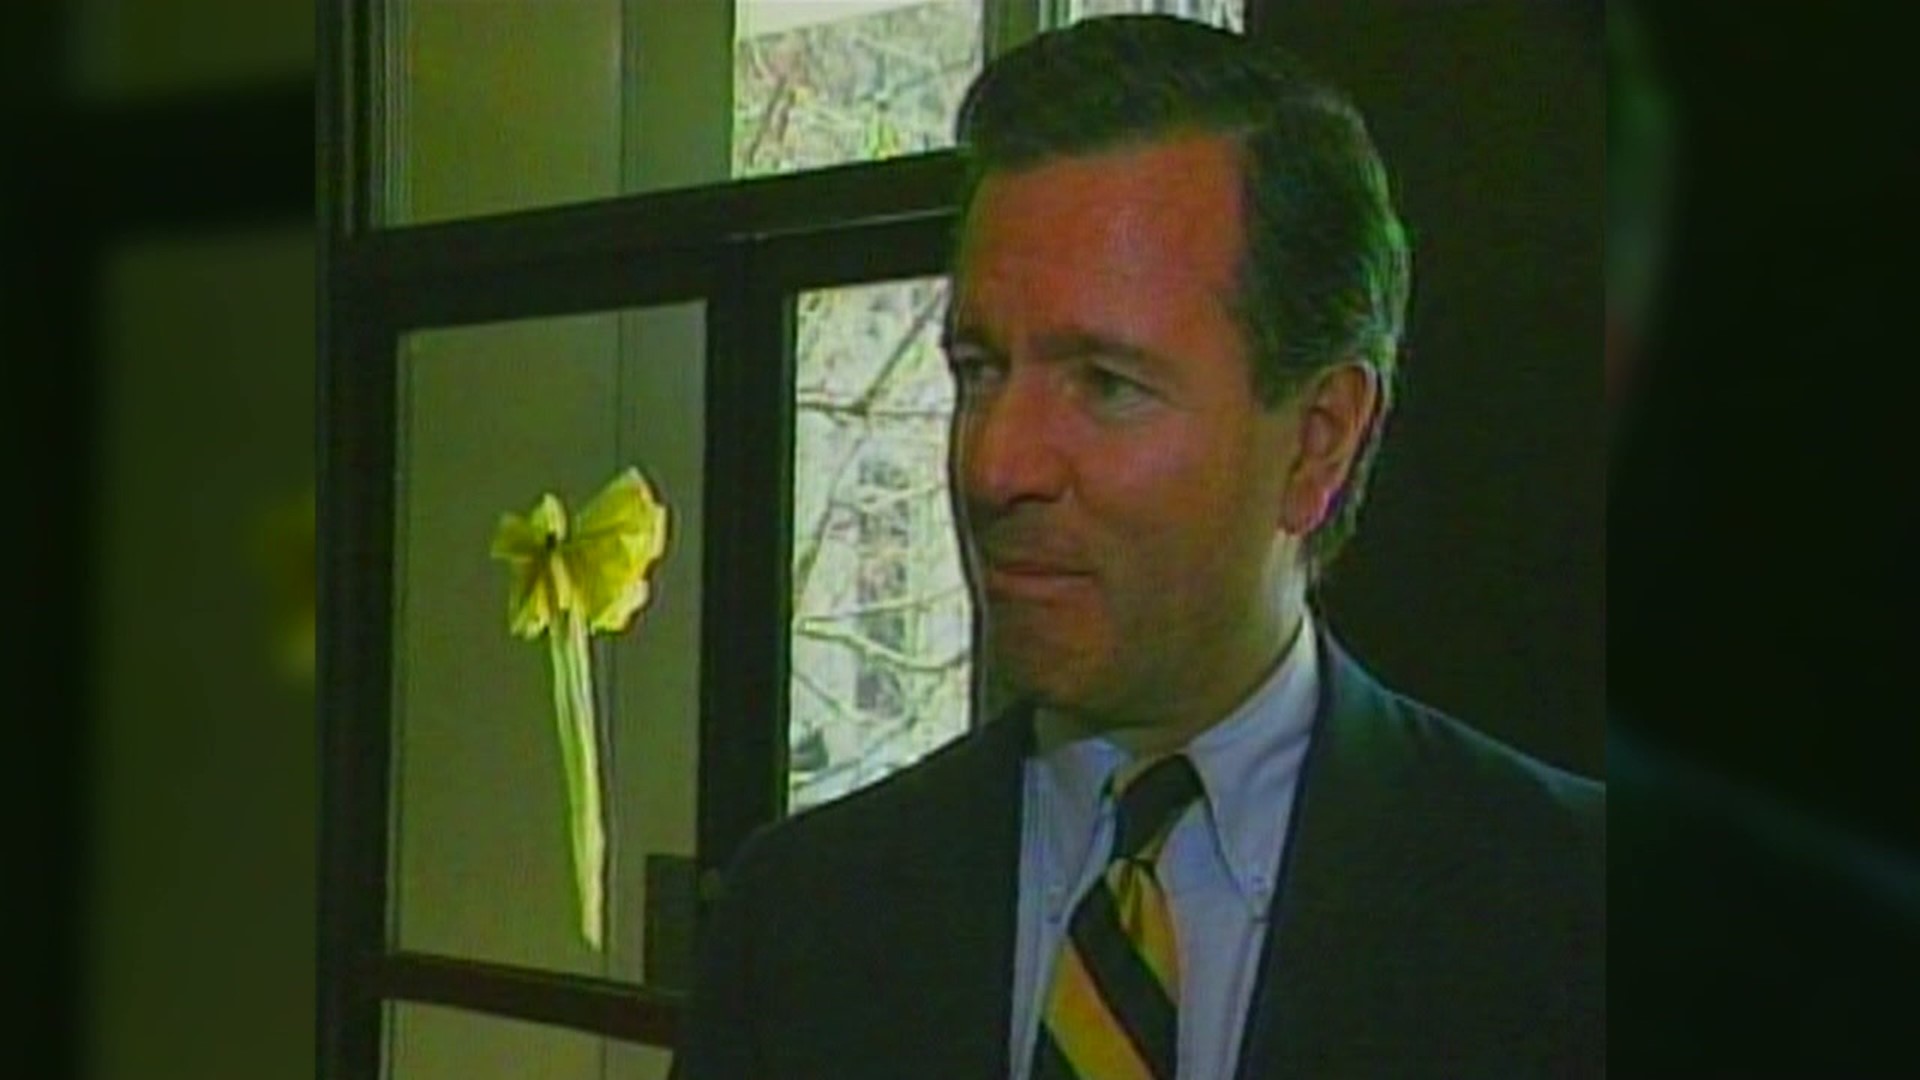 Newswatch 16's Fred Letteri spoke with the Senator just hours before he died in 1991.